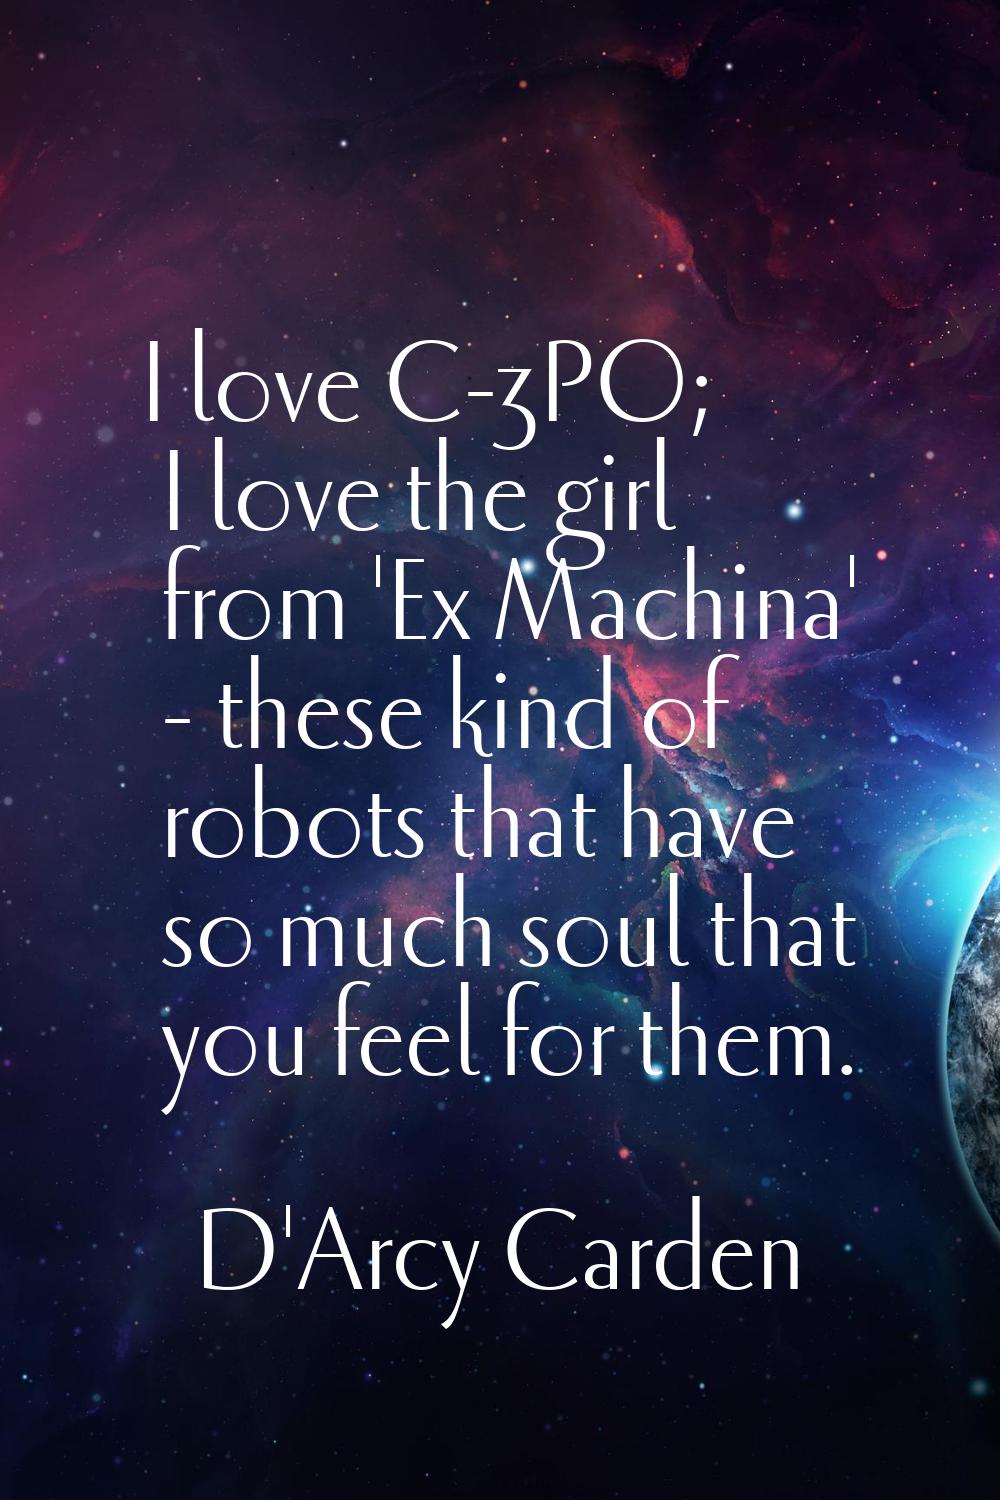 I love C-3PO; I love the girl from 'Ex Machina' - these kind of robots that have so much soul that 